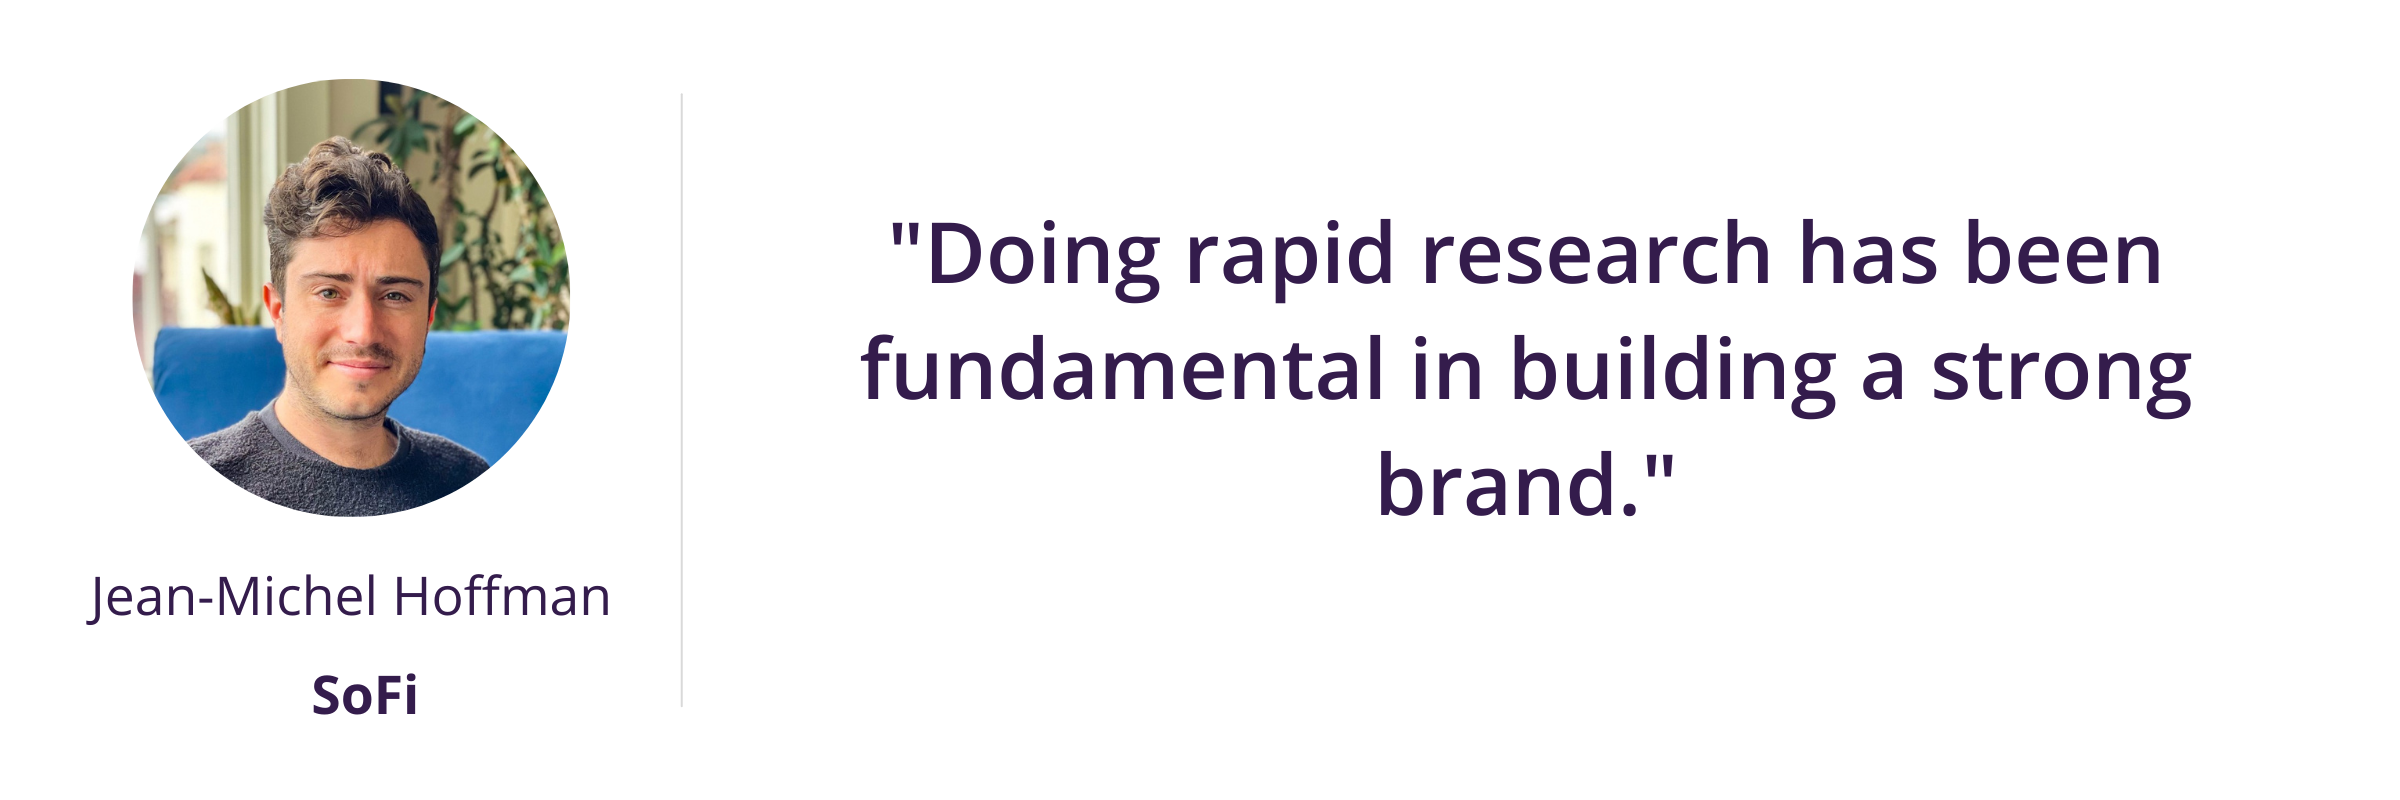 Doing rapid research has been fundamental in building a strong brand.